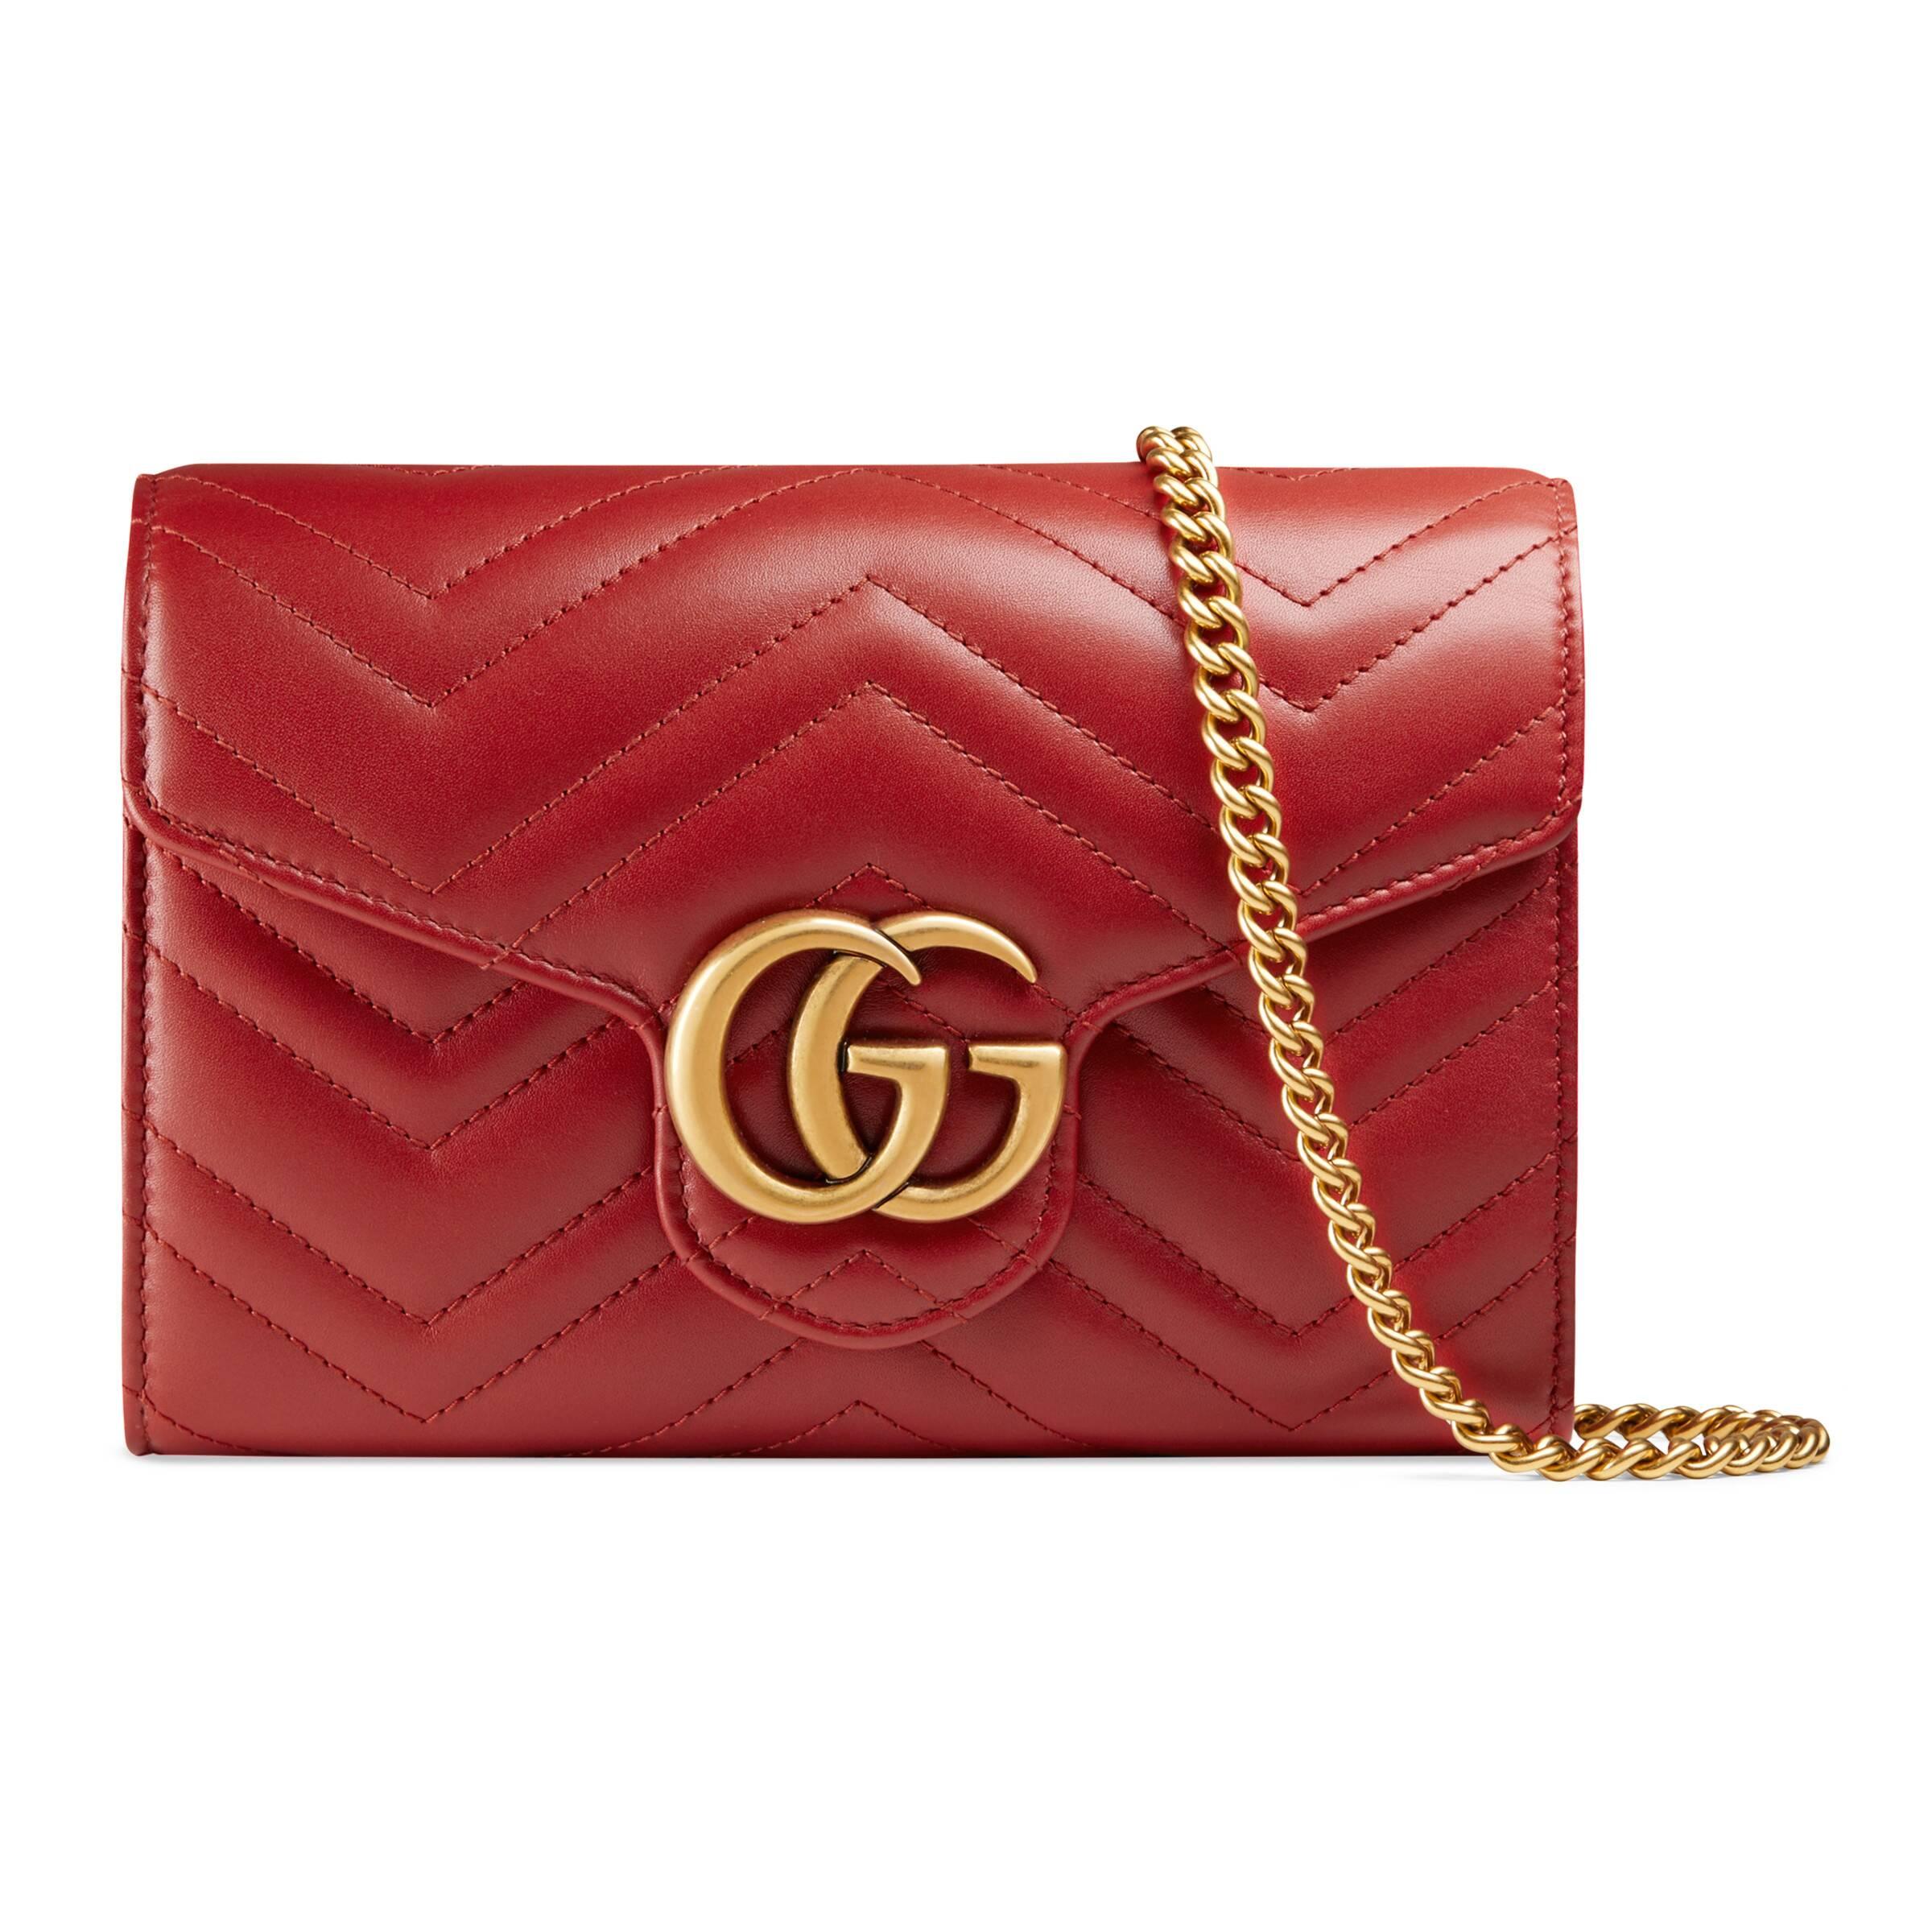 Gucci Leather Mini GG Marmont Matelassé Bag in Red | Lyst